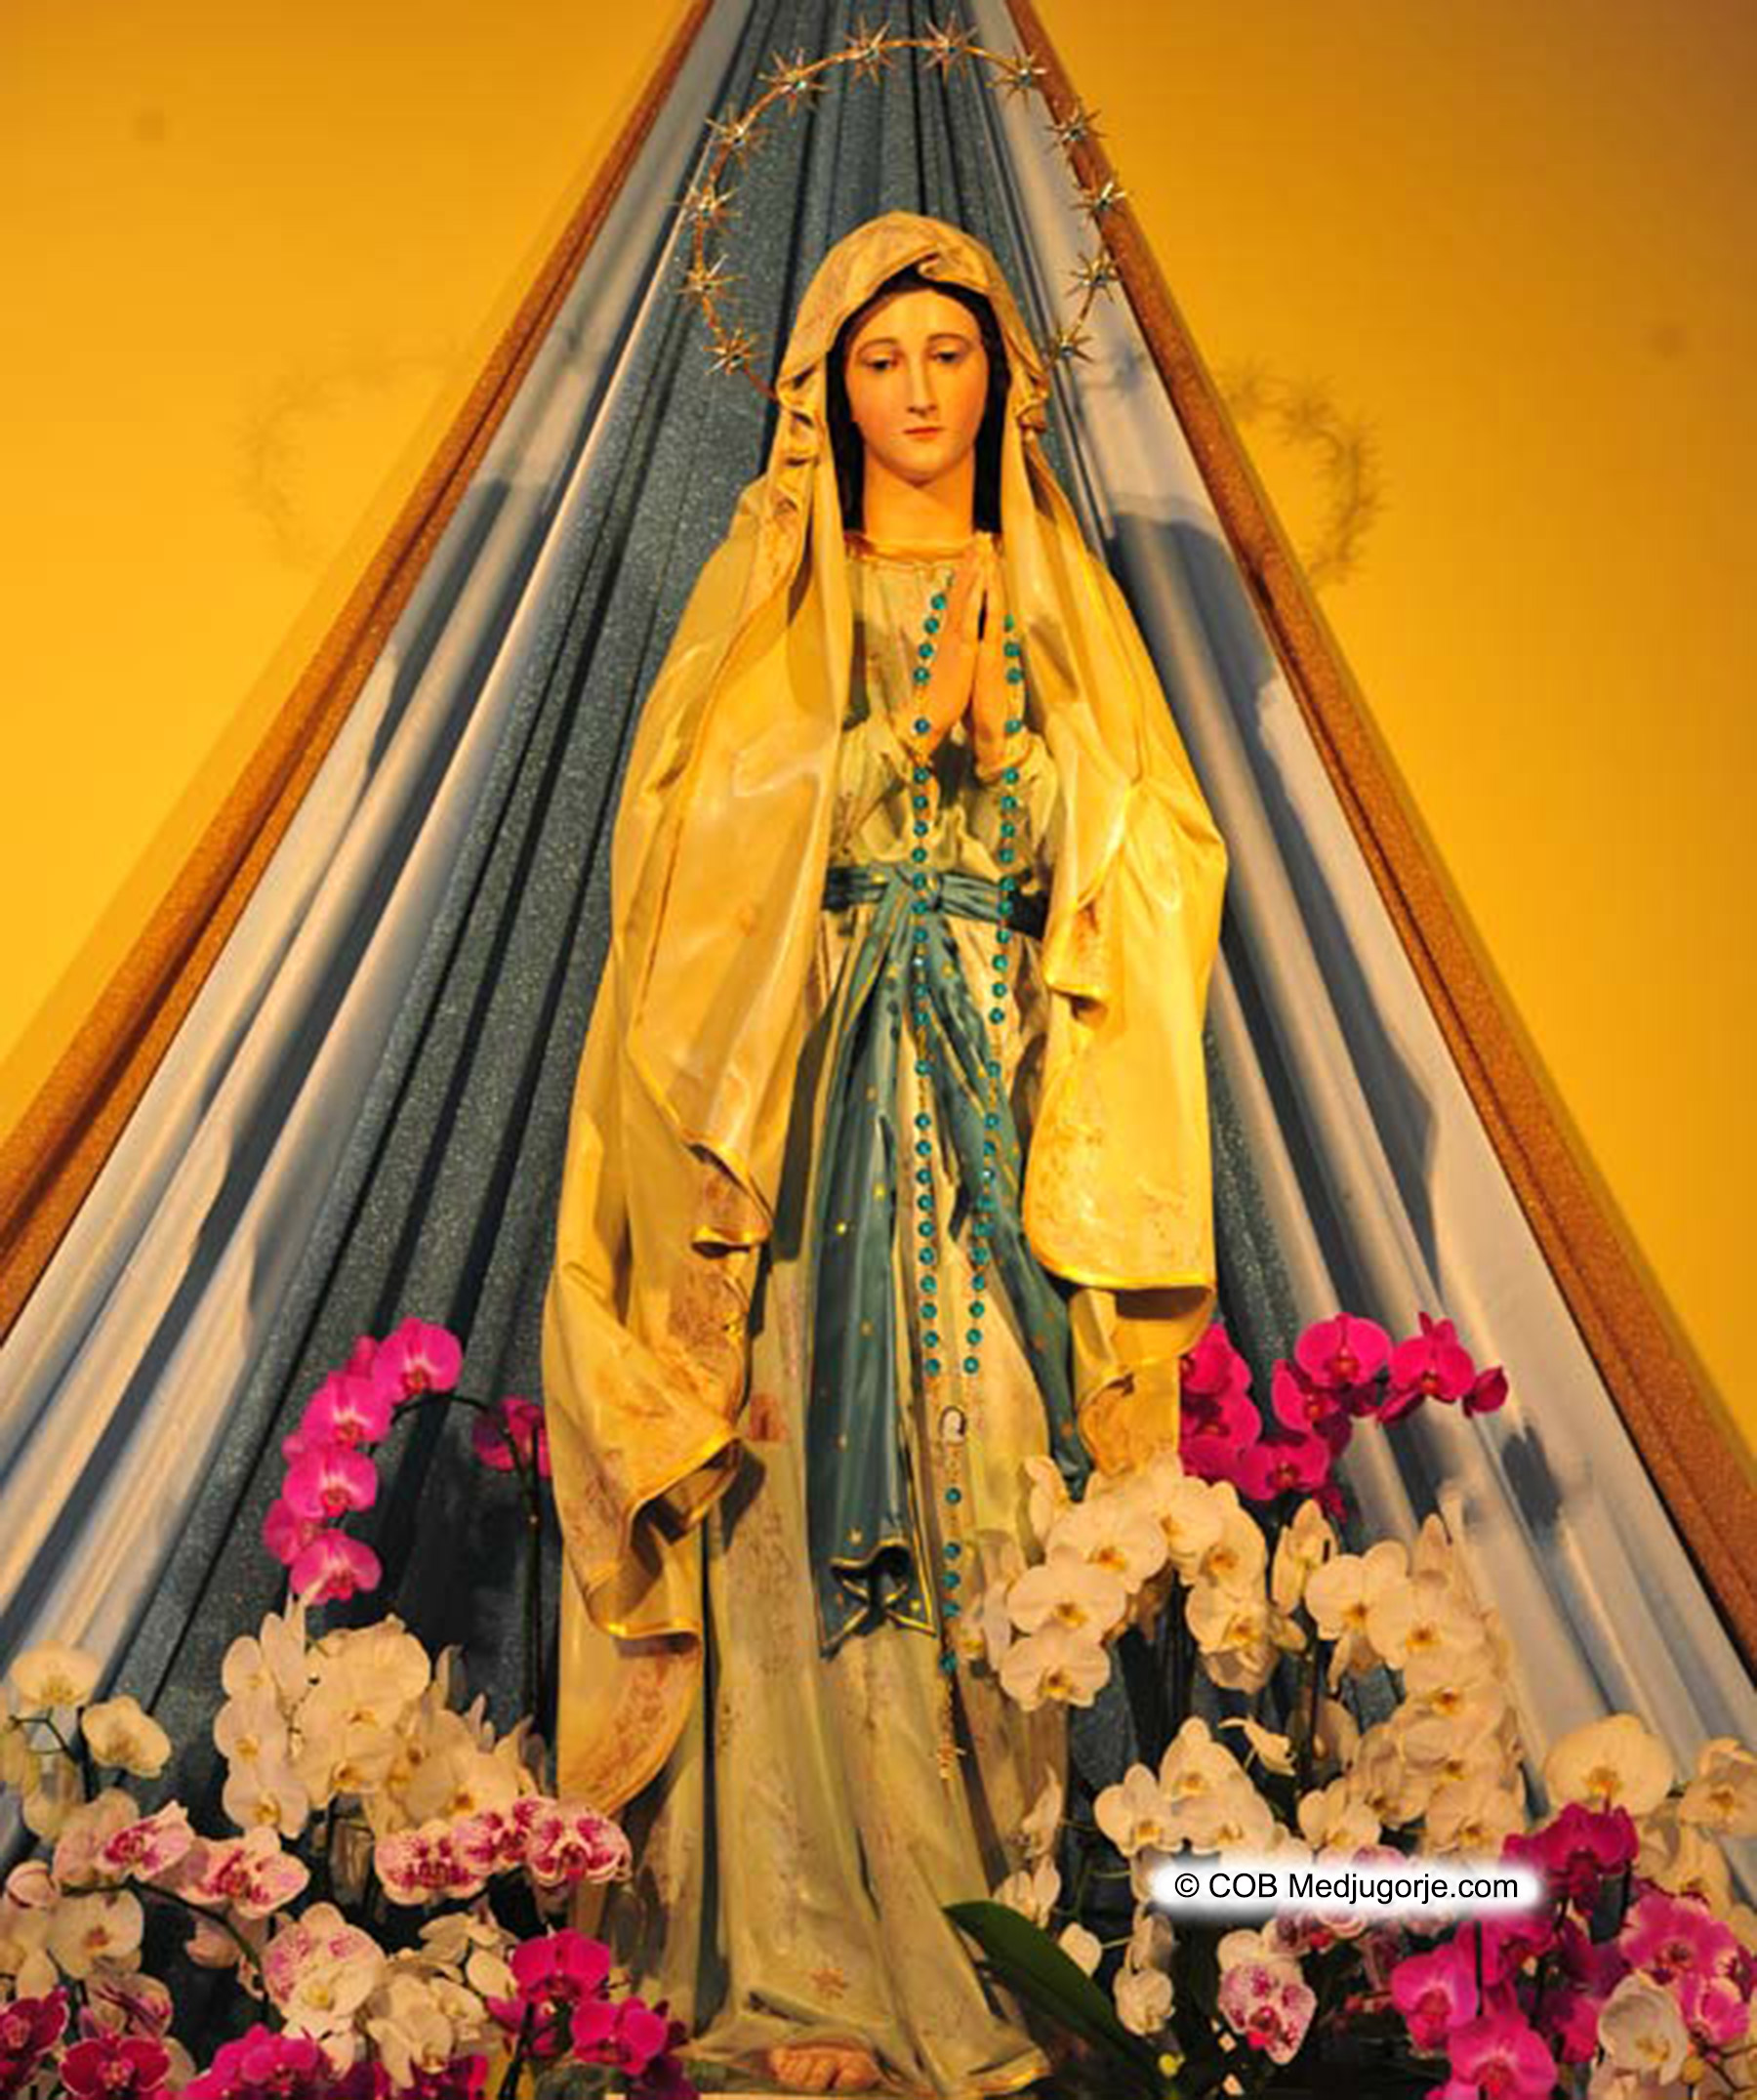 Statue of Our Lady in Medjugorje